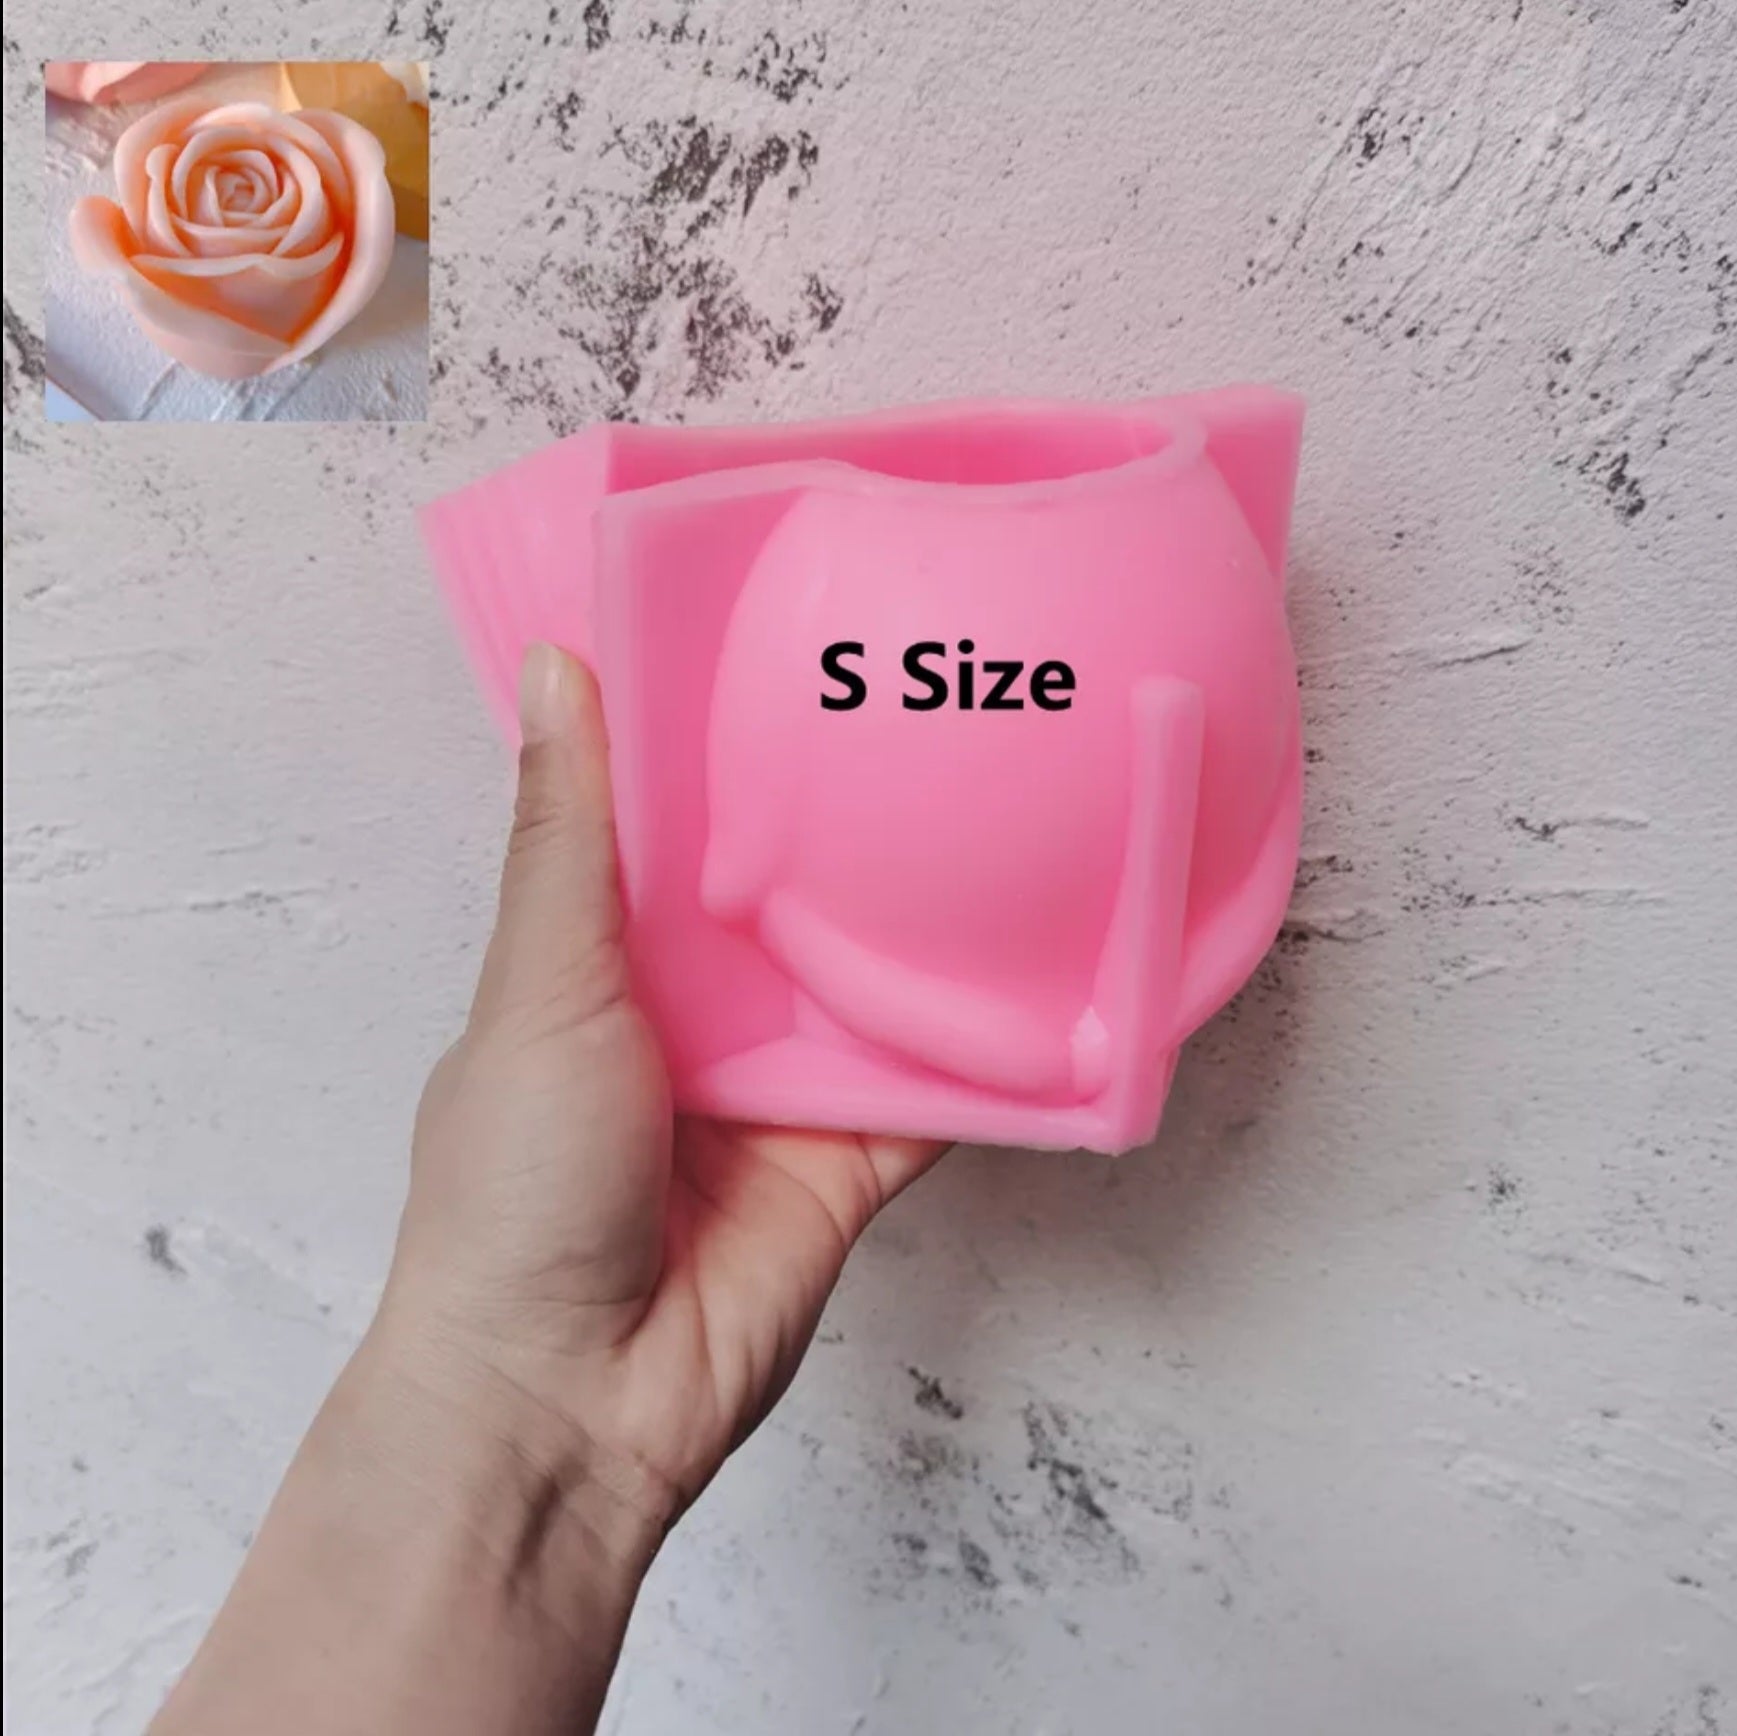 Large Rose Candle Moulds (Pink) 6 - Silicone Mould, Mold for DIY Candles. Created using candle making kit with cotton candle wicks and candle colour chips. Using soy wax for pillar candles. Sold by Myka Candles Moulds Australia